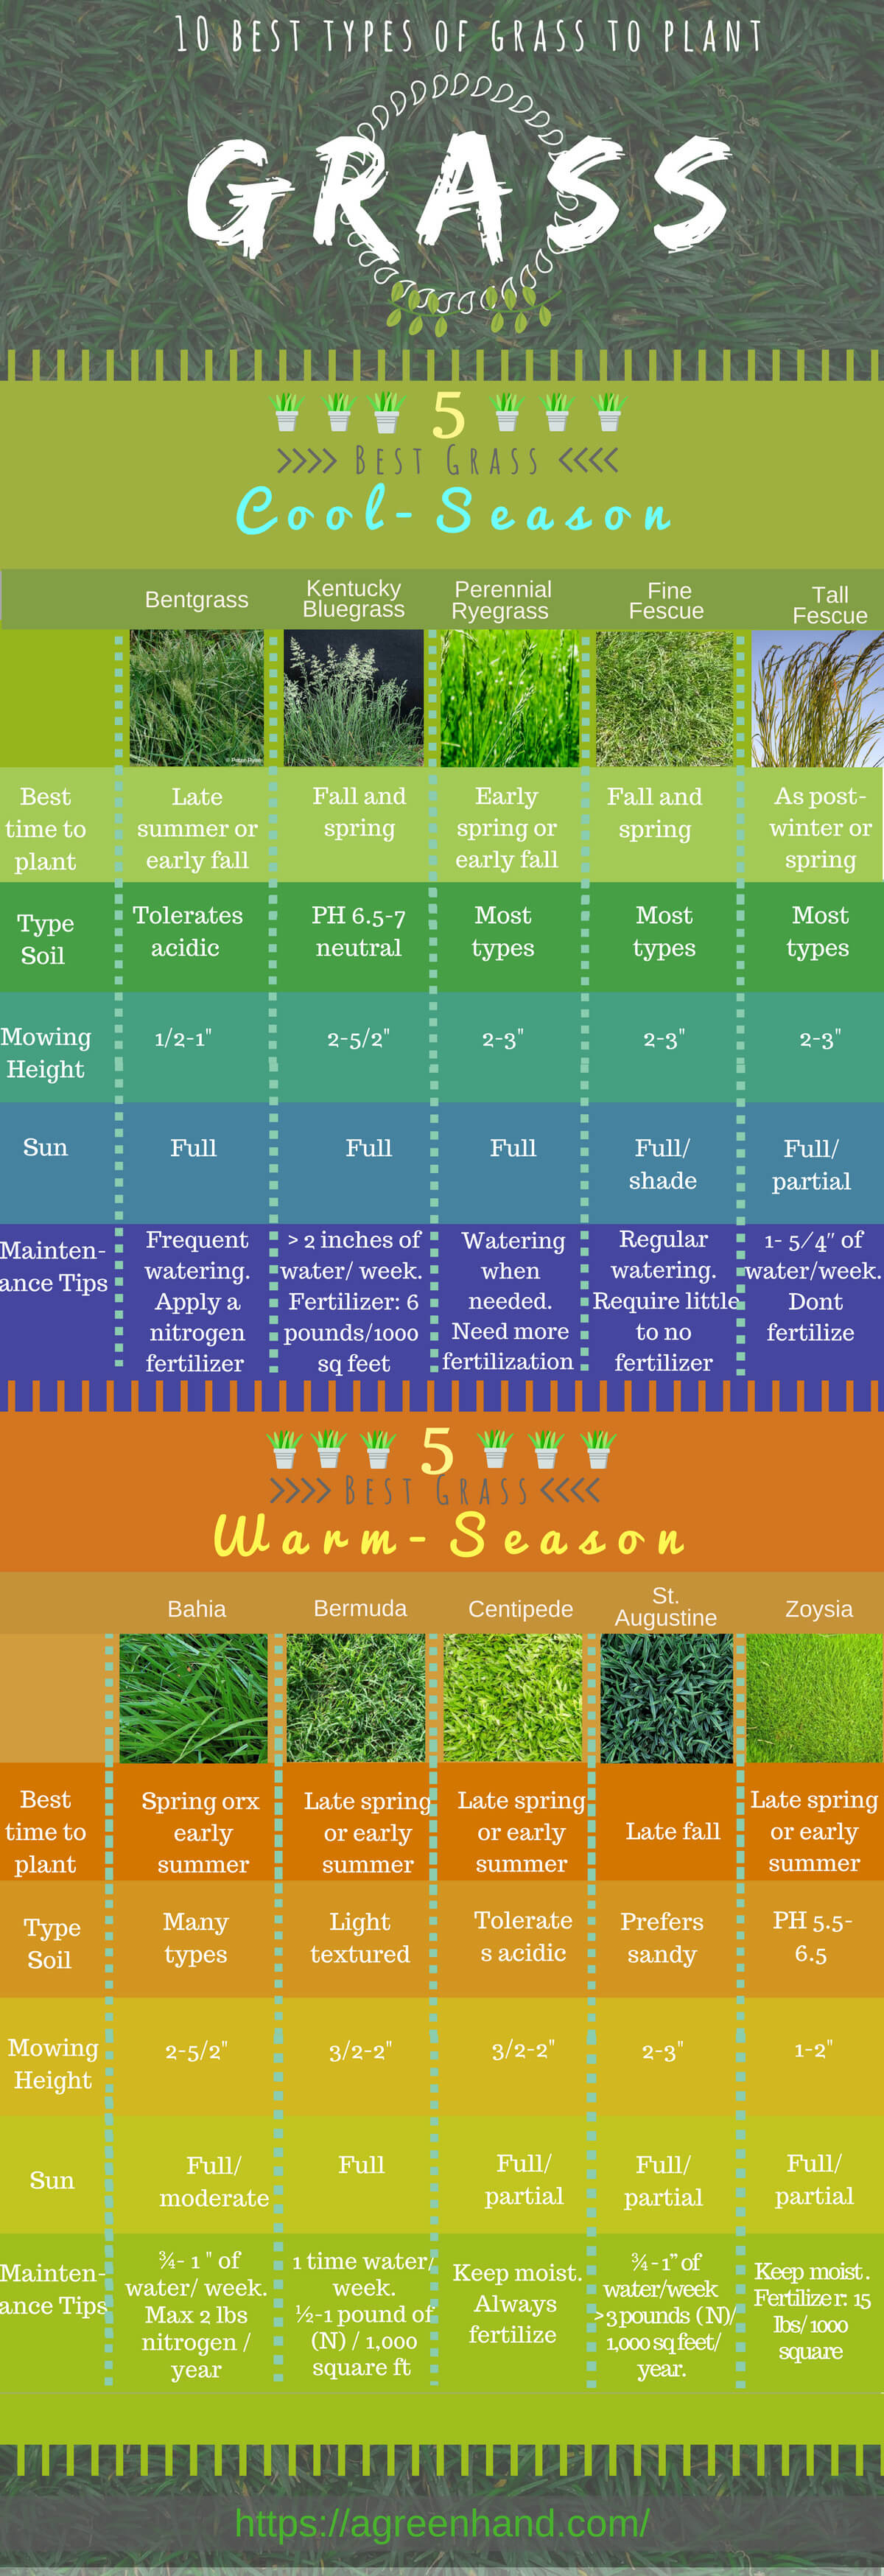 10 popular types of grasses to plant in all seasons [Infographic] | ecogreenlove